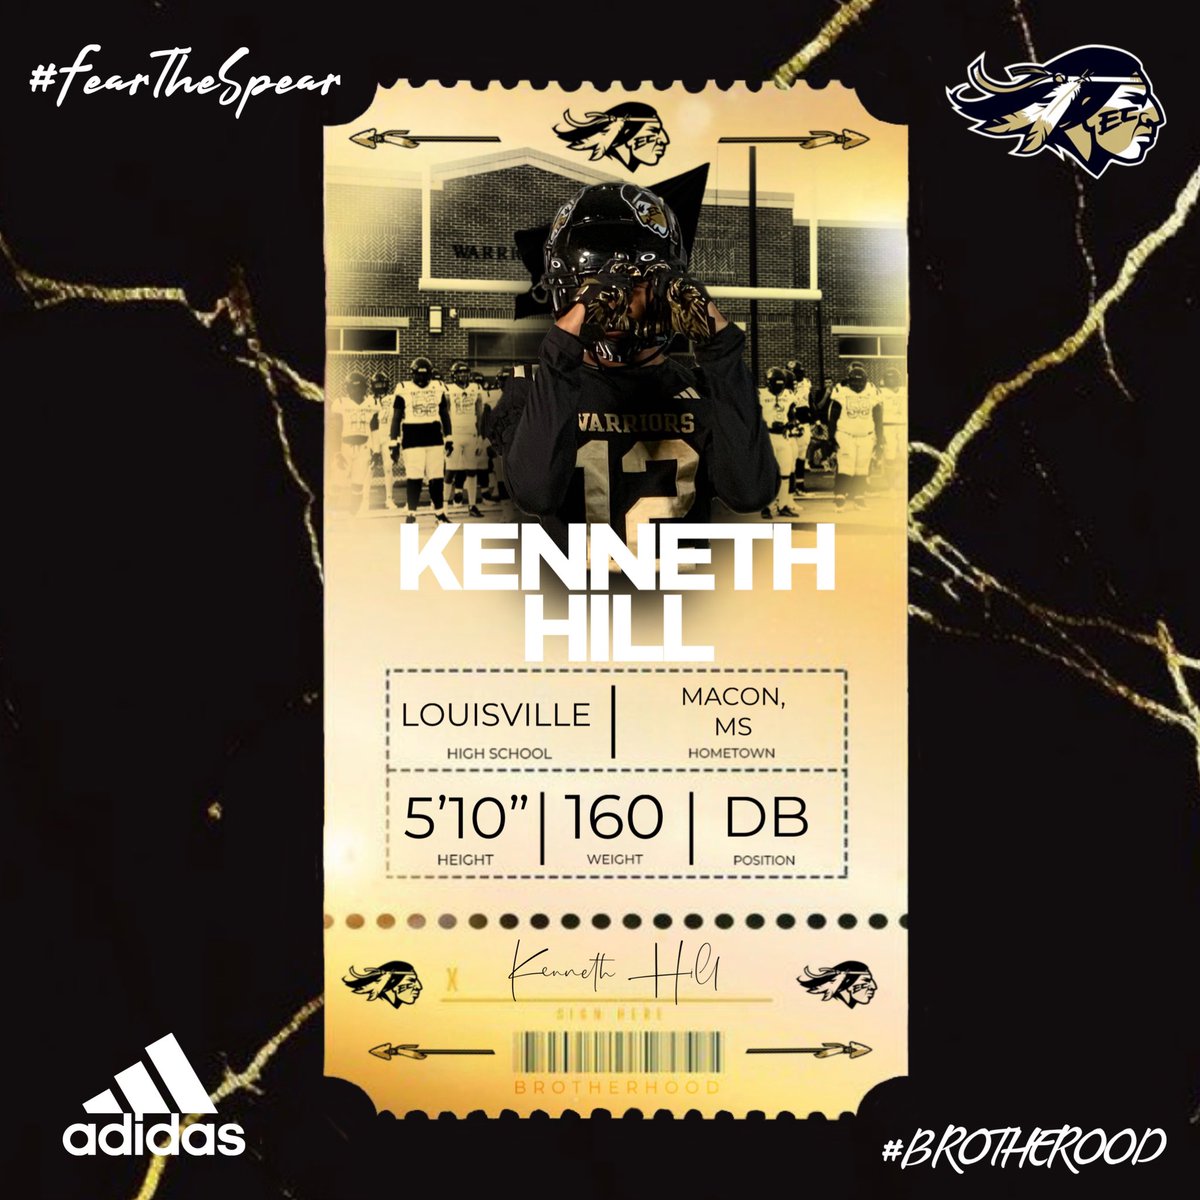 LOCK DOWN DB from Louisville!! Kenneth Hill has punched his ticket to join the Brotherhood!! #BROTHERHOOD X #FearTheSpear